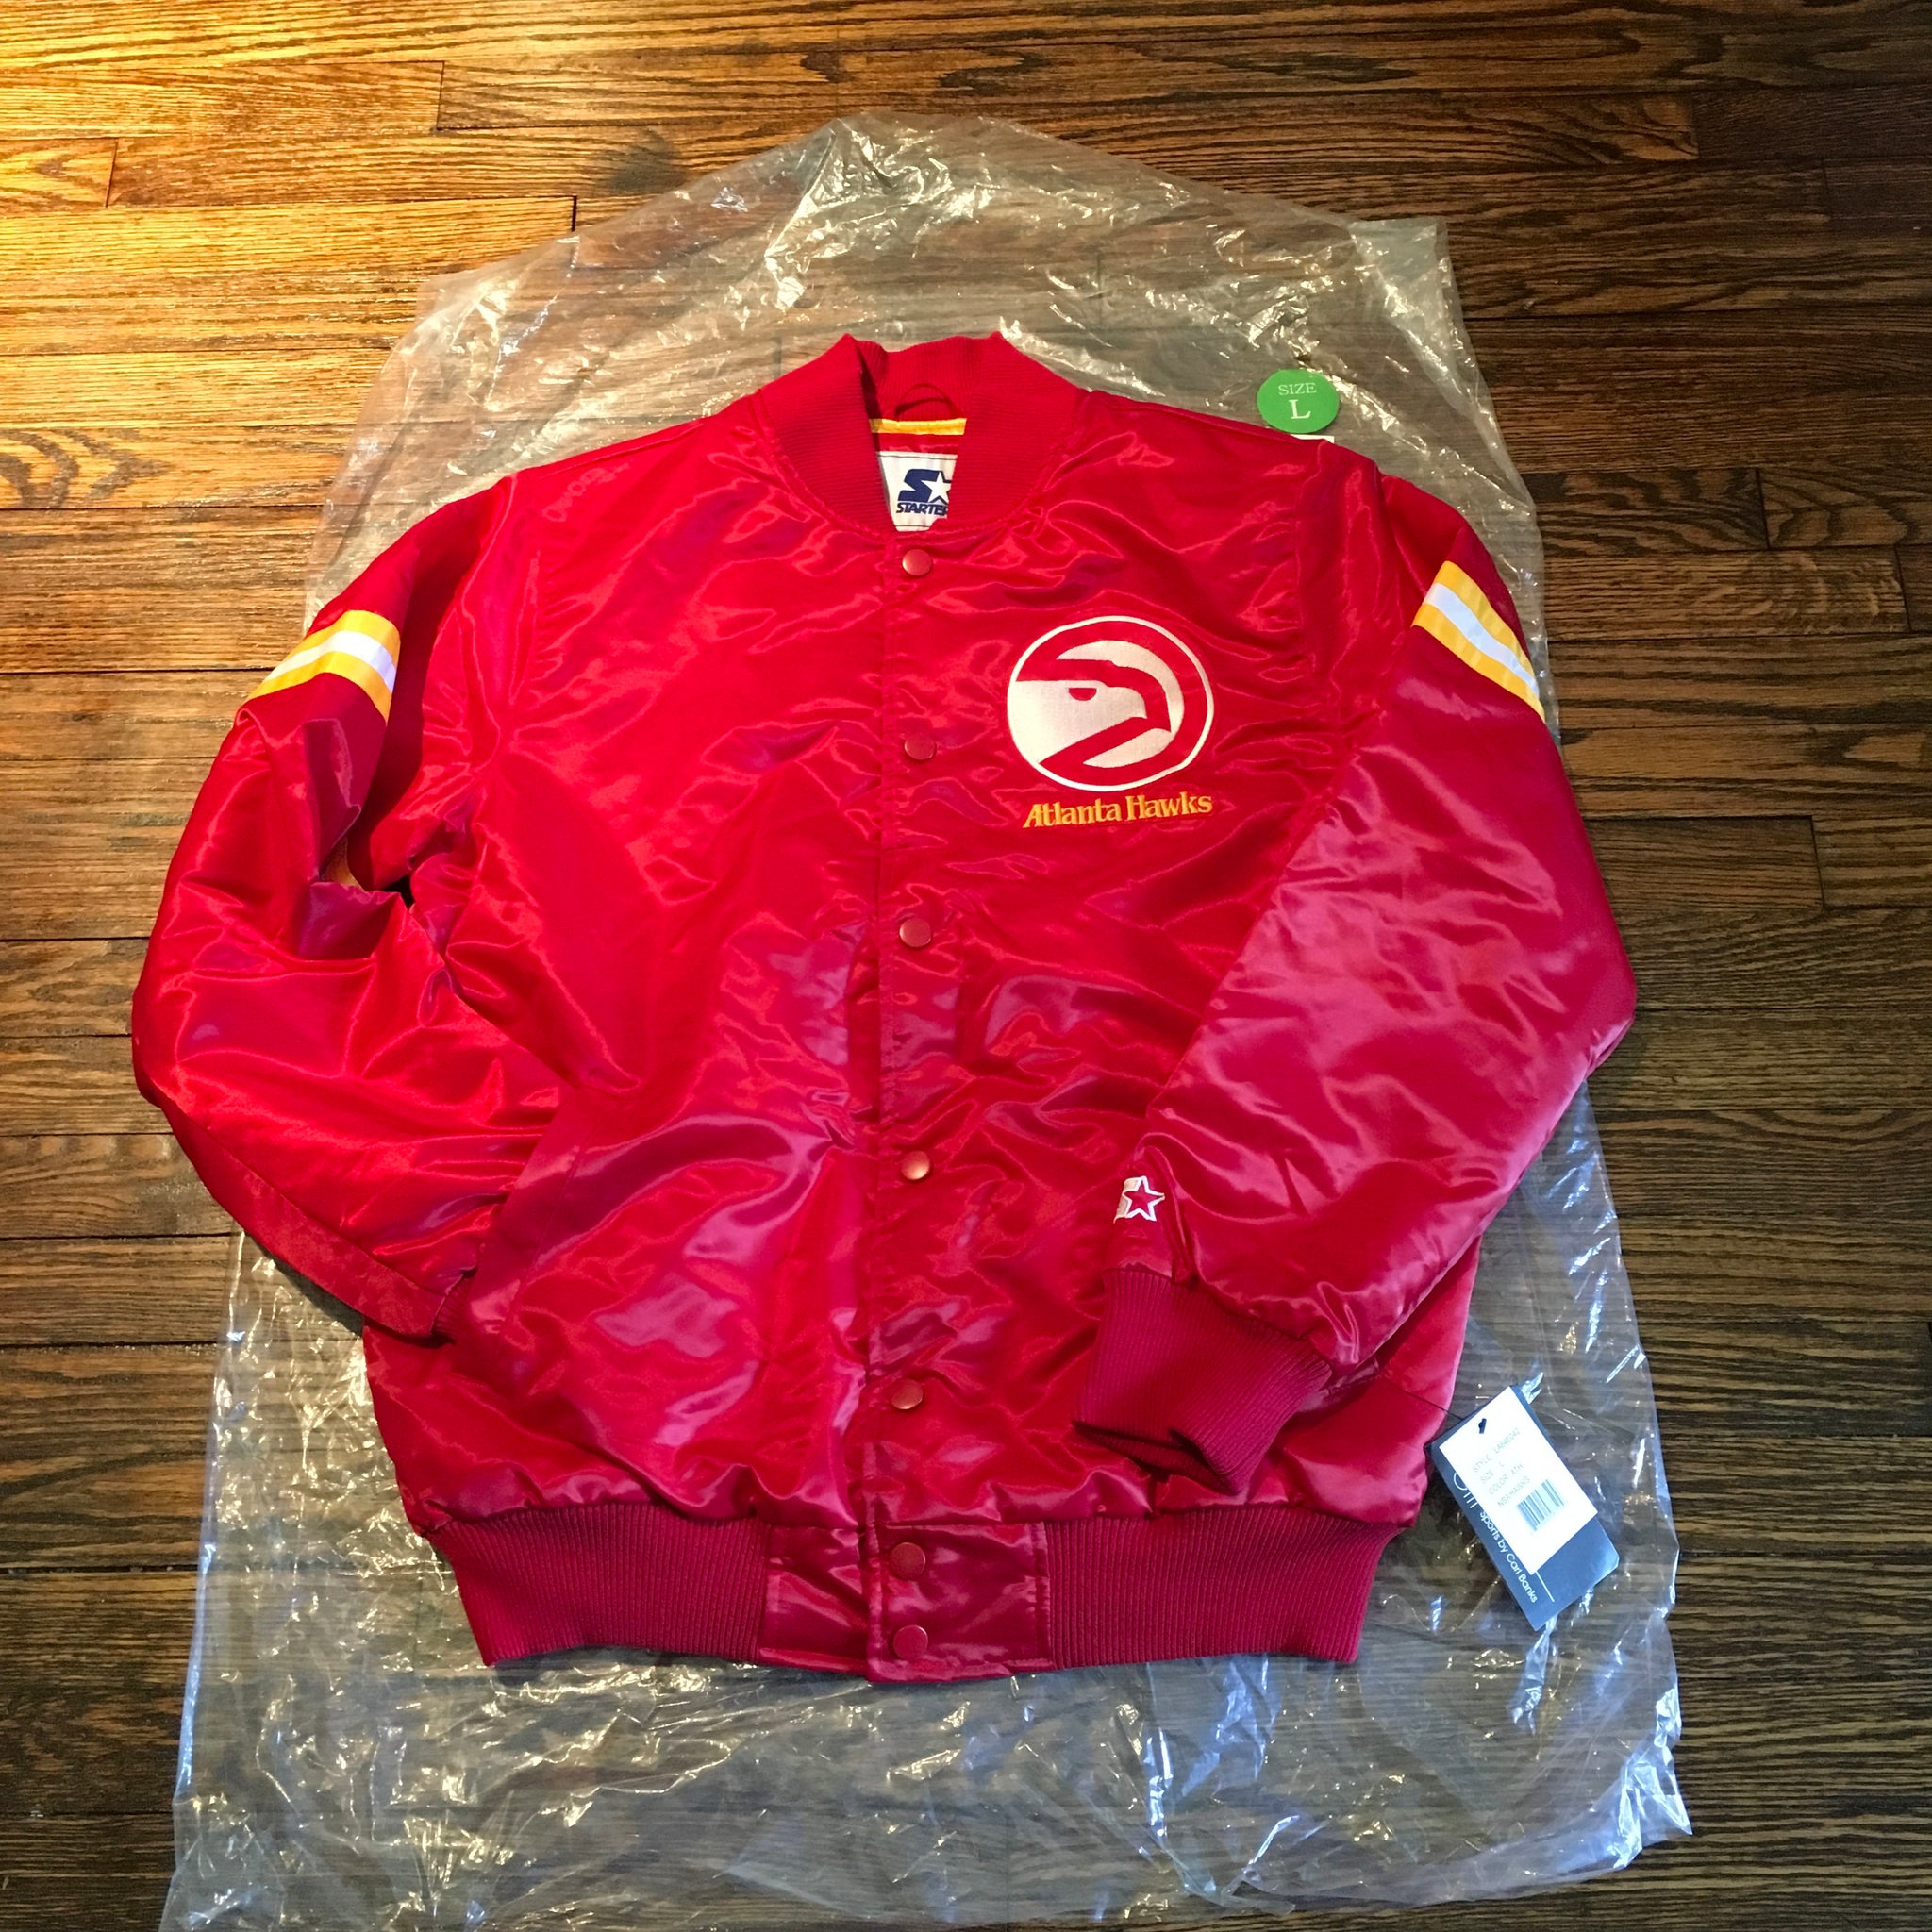 Does anyone have any info on this jacket? : r/hawks